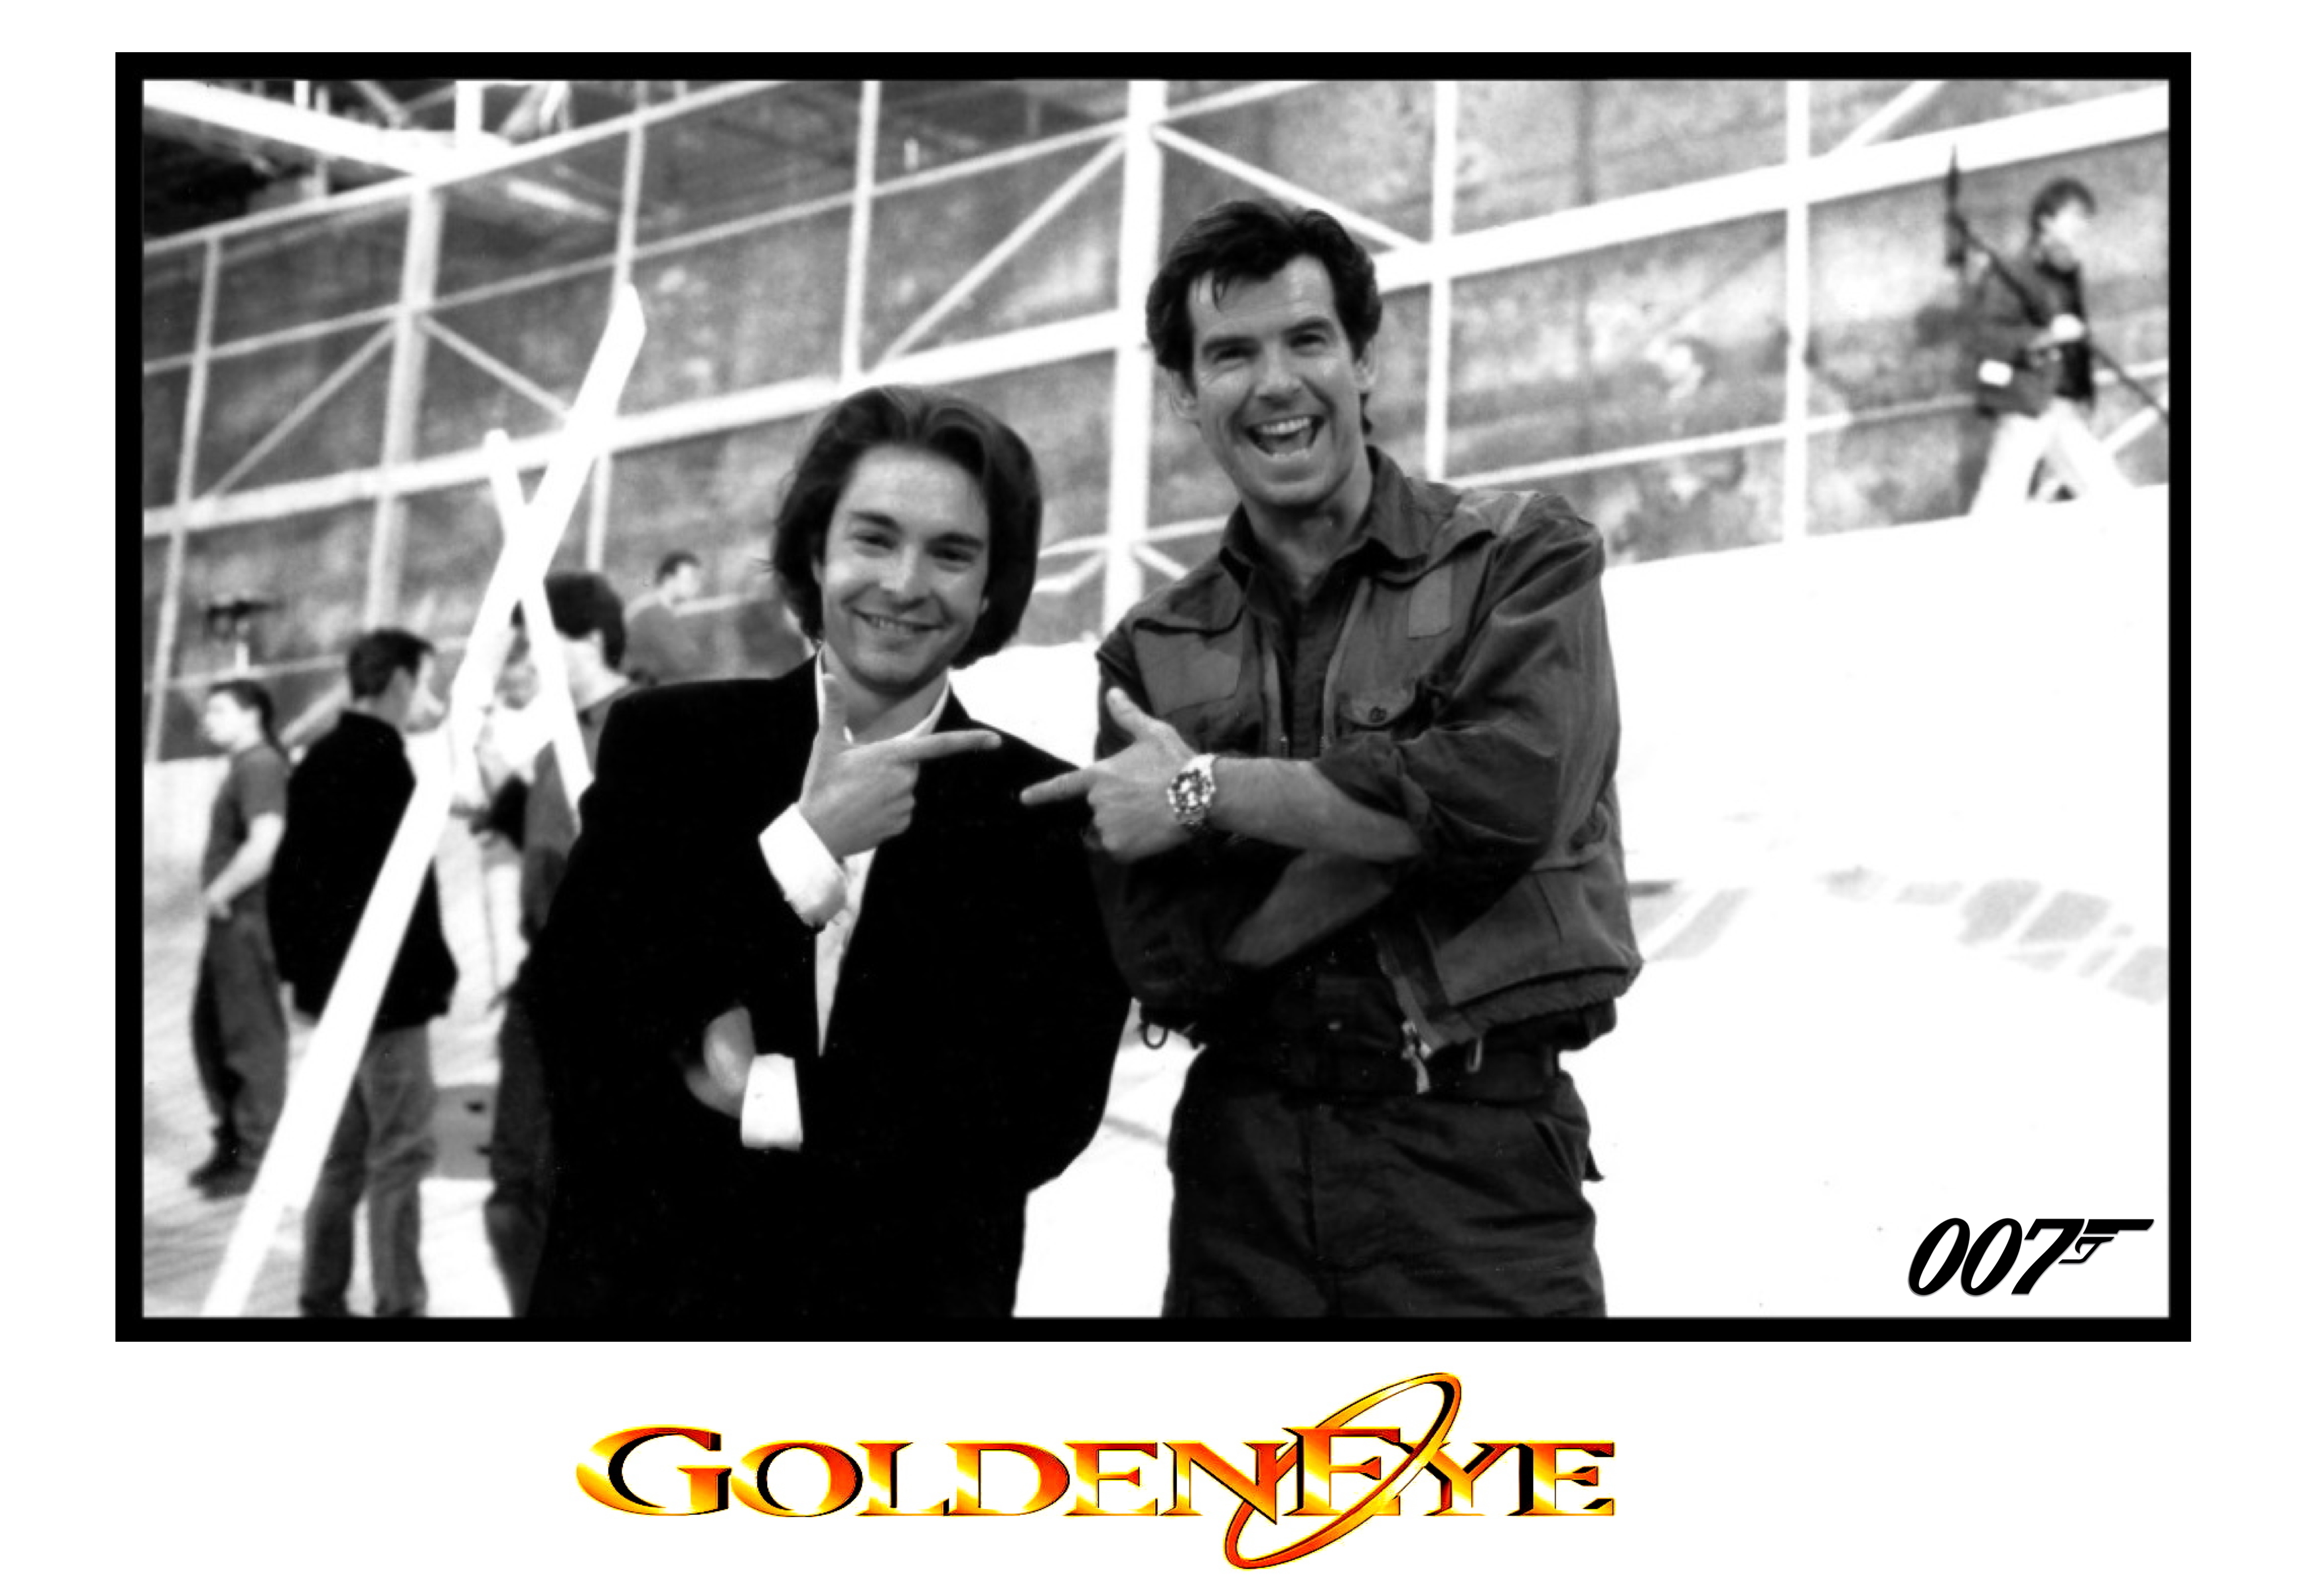 PIERCE BROSNAN and DAVID GIAMMARCO during filming of 